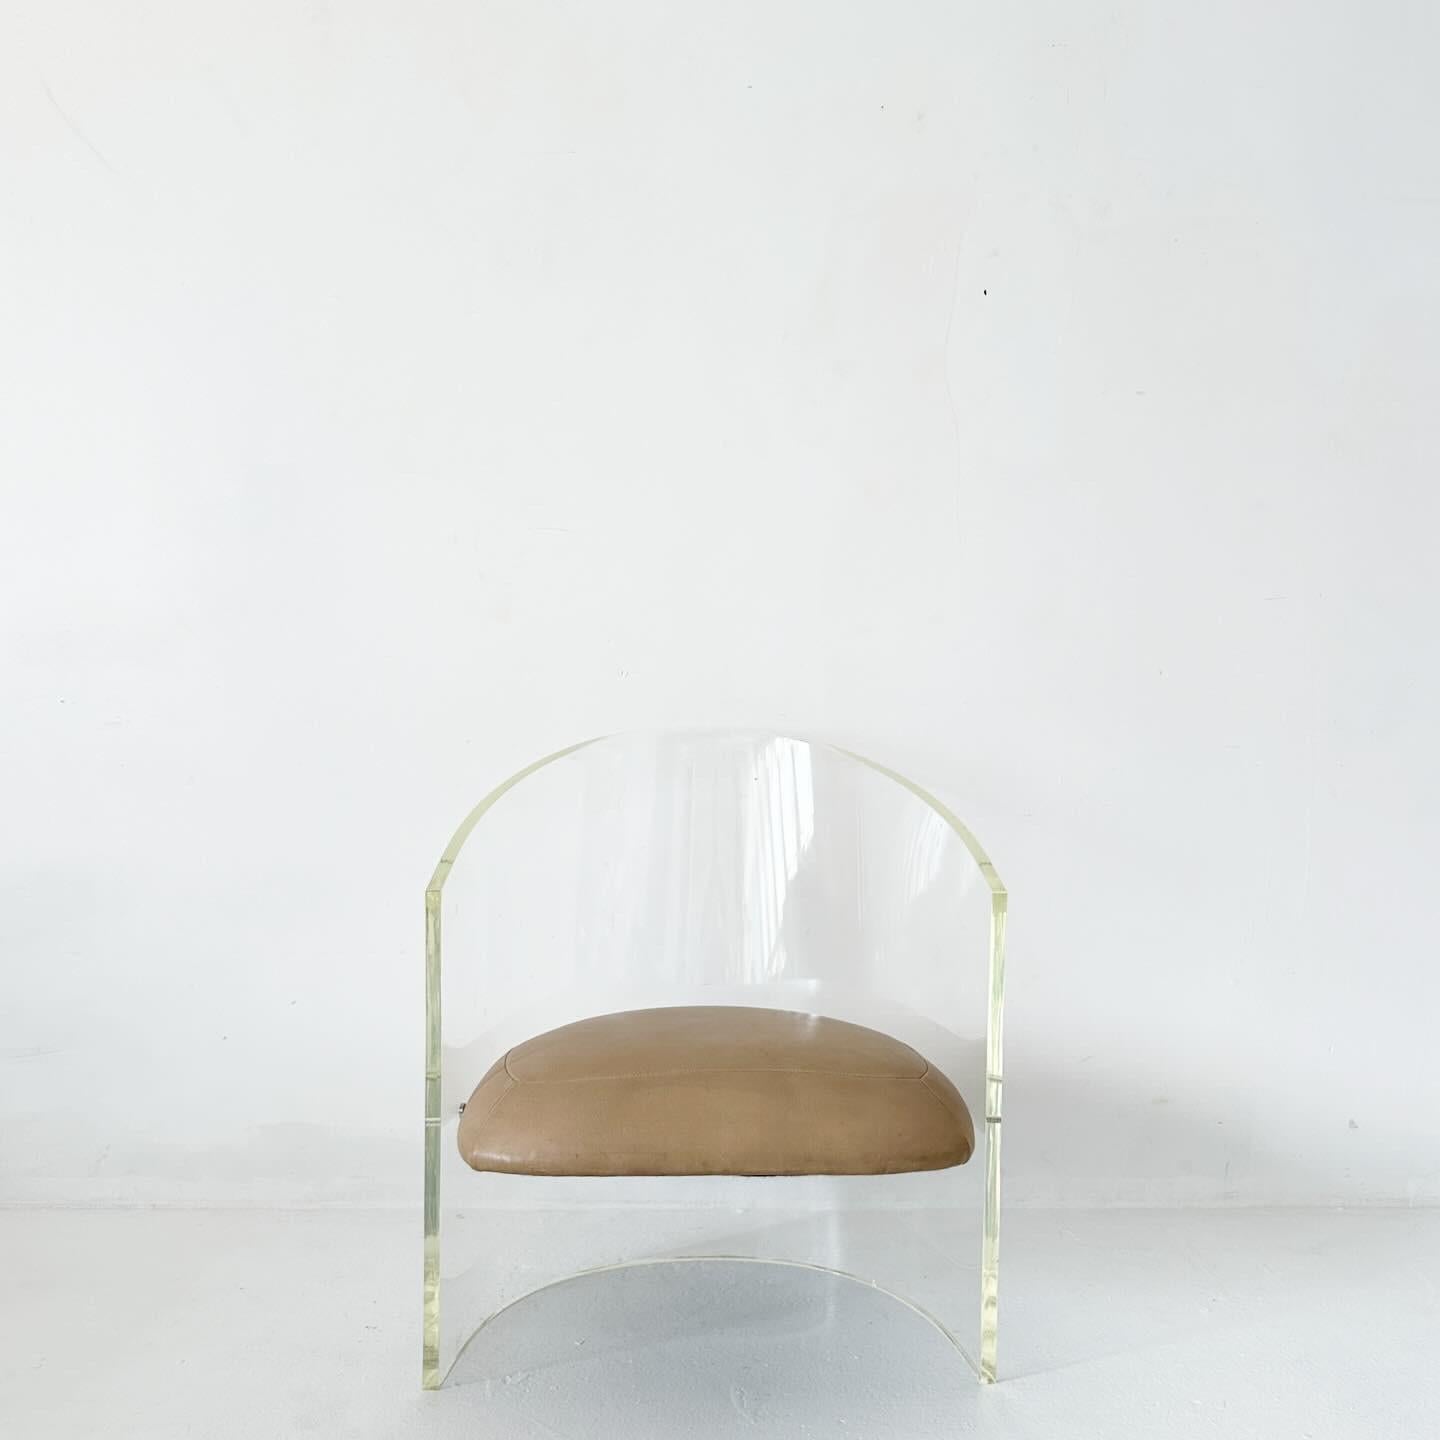 1970s lucite tub chair in manner of Vladimir Kagan. No marks to unsure if original, purchased at auction in Los Angeles.

Chair is vanity height and seat is original almond leather. Lucite is 3/4